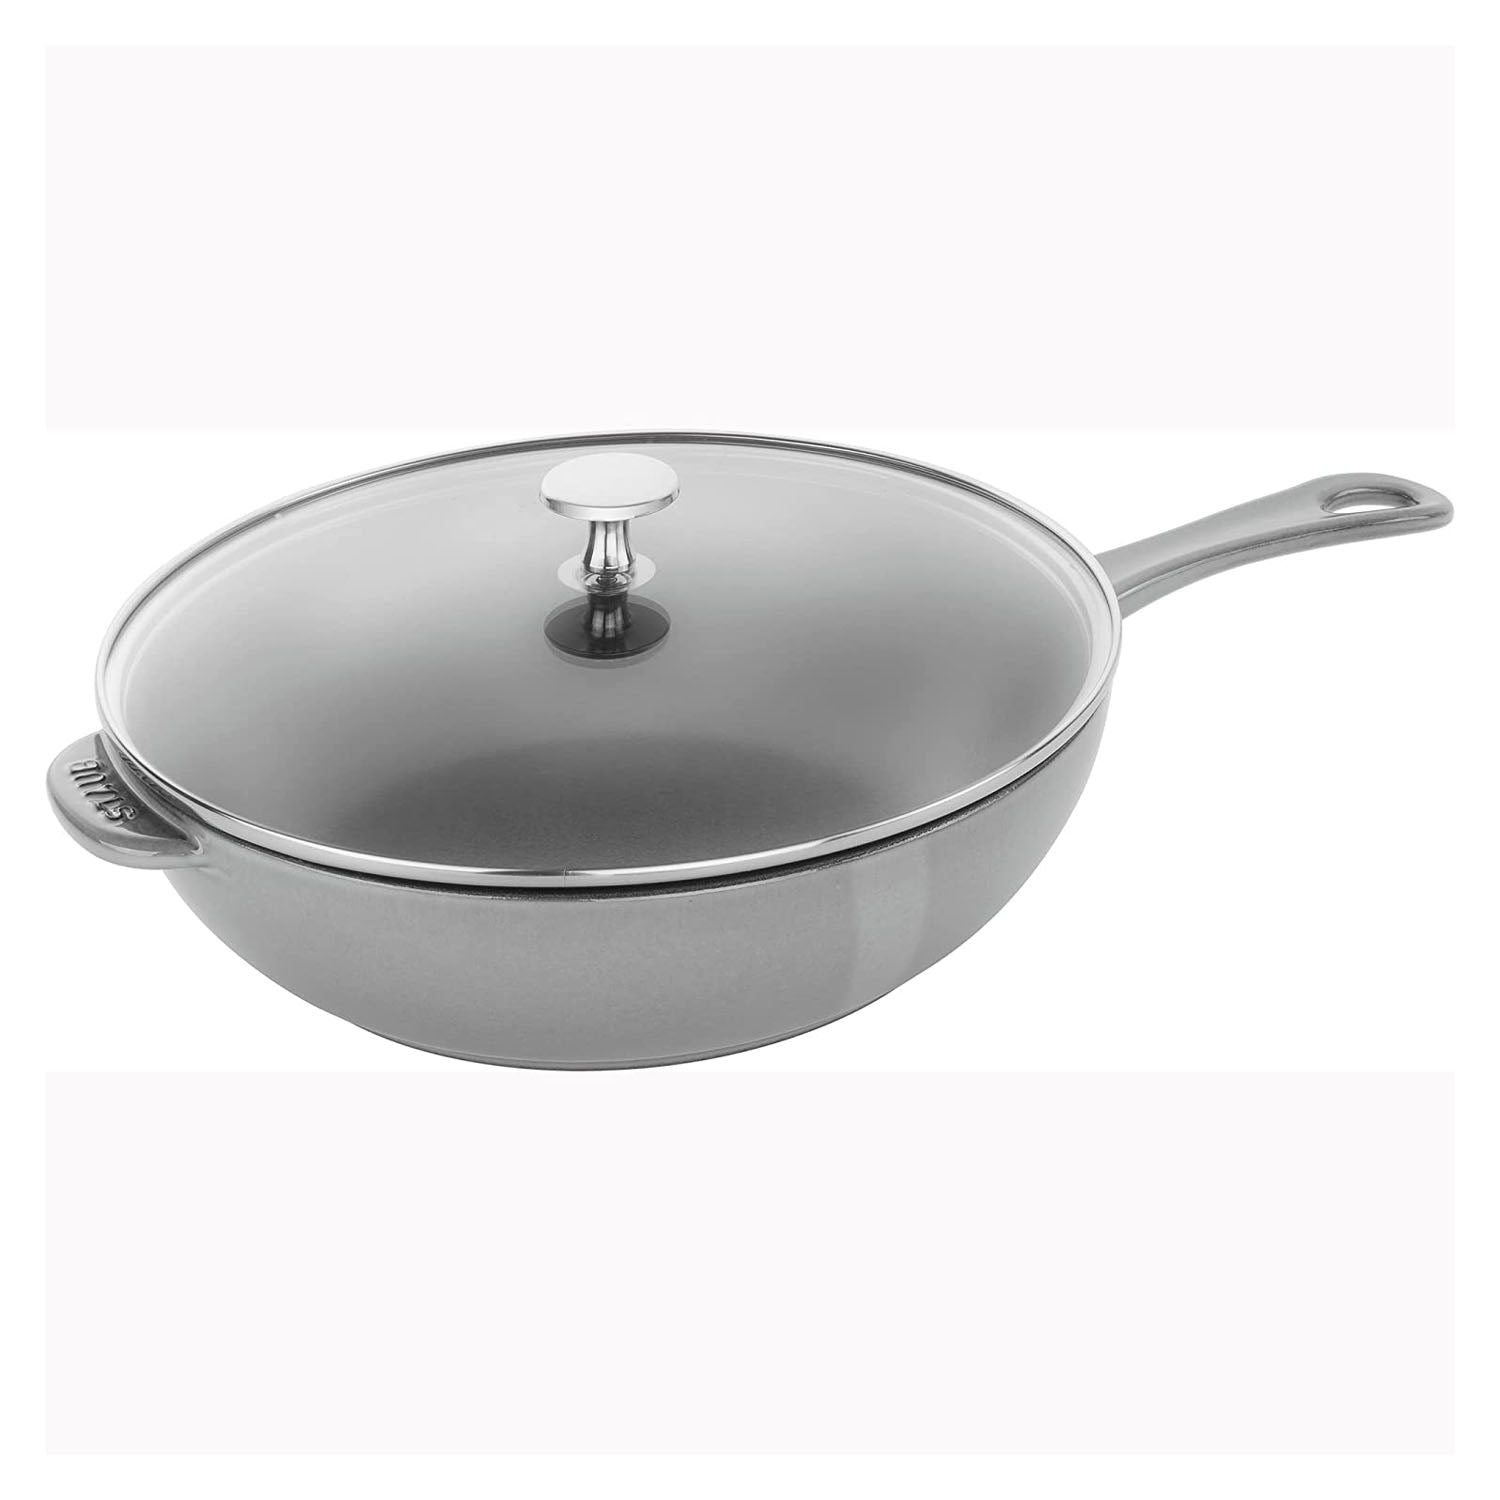 Staub Cast Iron Cocotte and Fry Pan Set in Graphite Grey